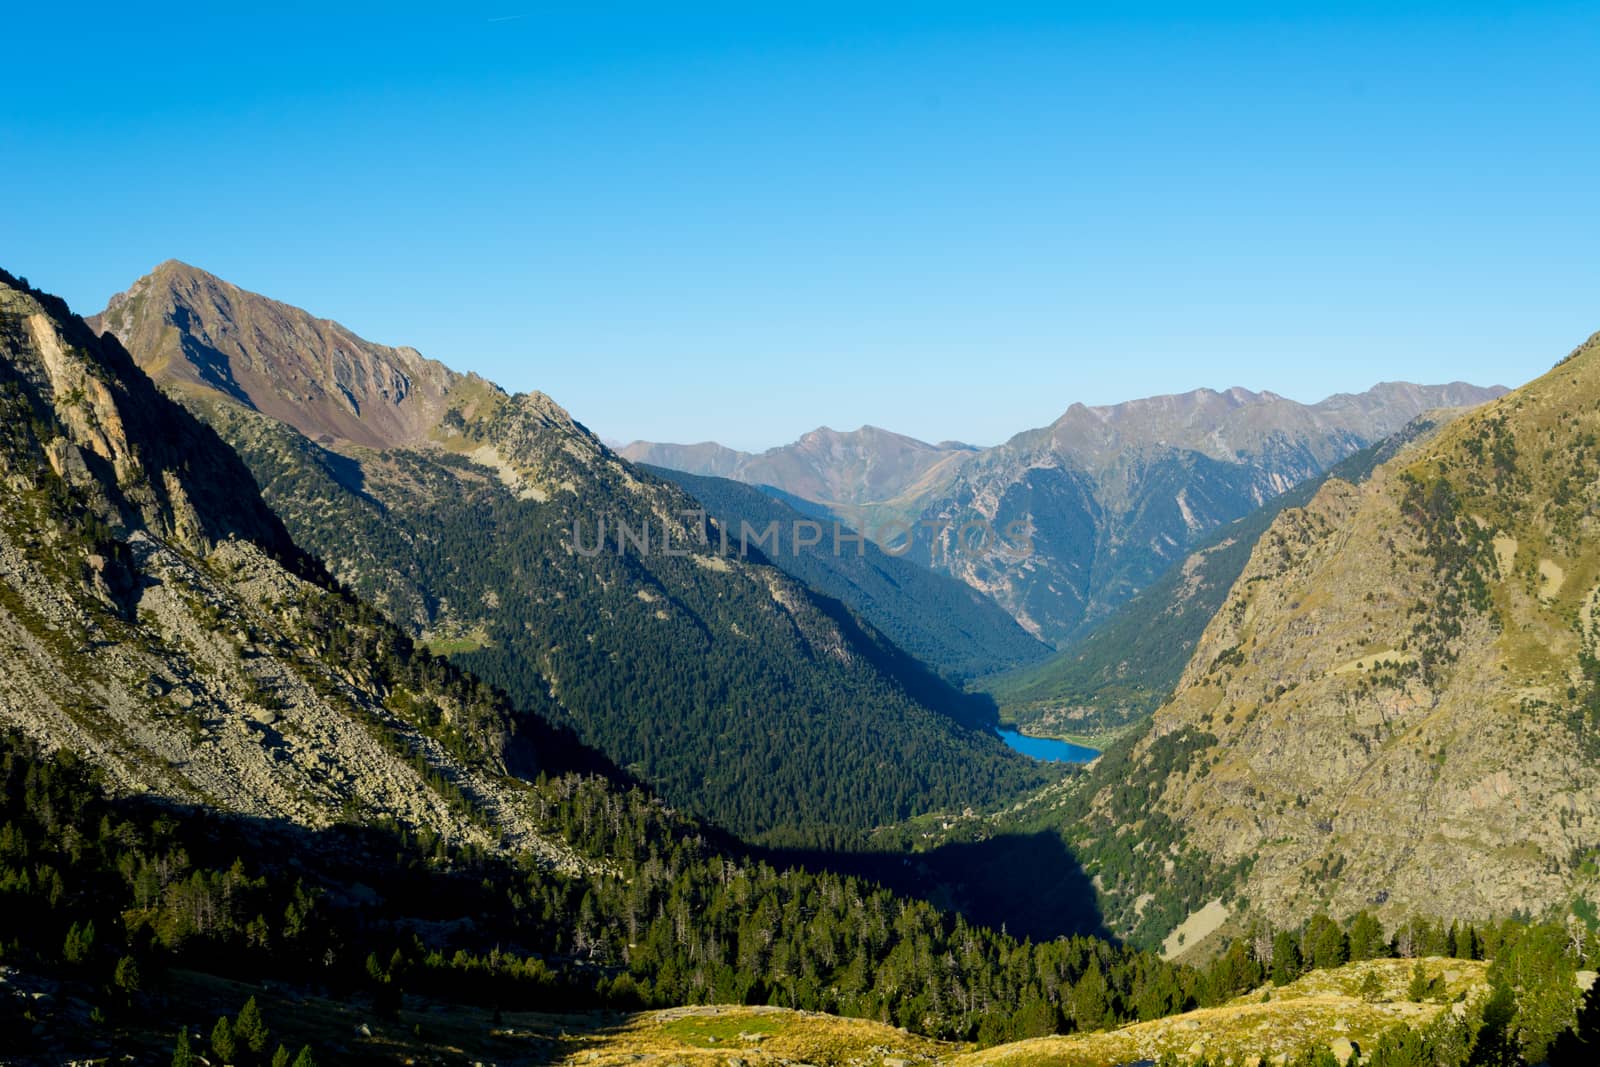 Nature and landscape of the Spanish Pyrenees, Aiguestortes i Estany de Sant Maurici, Carros de Foc hiking trail, with lake in background by kb79